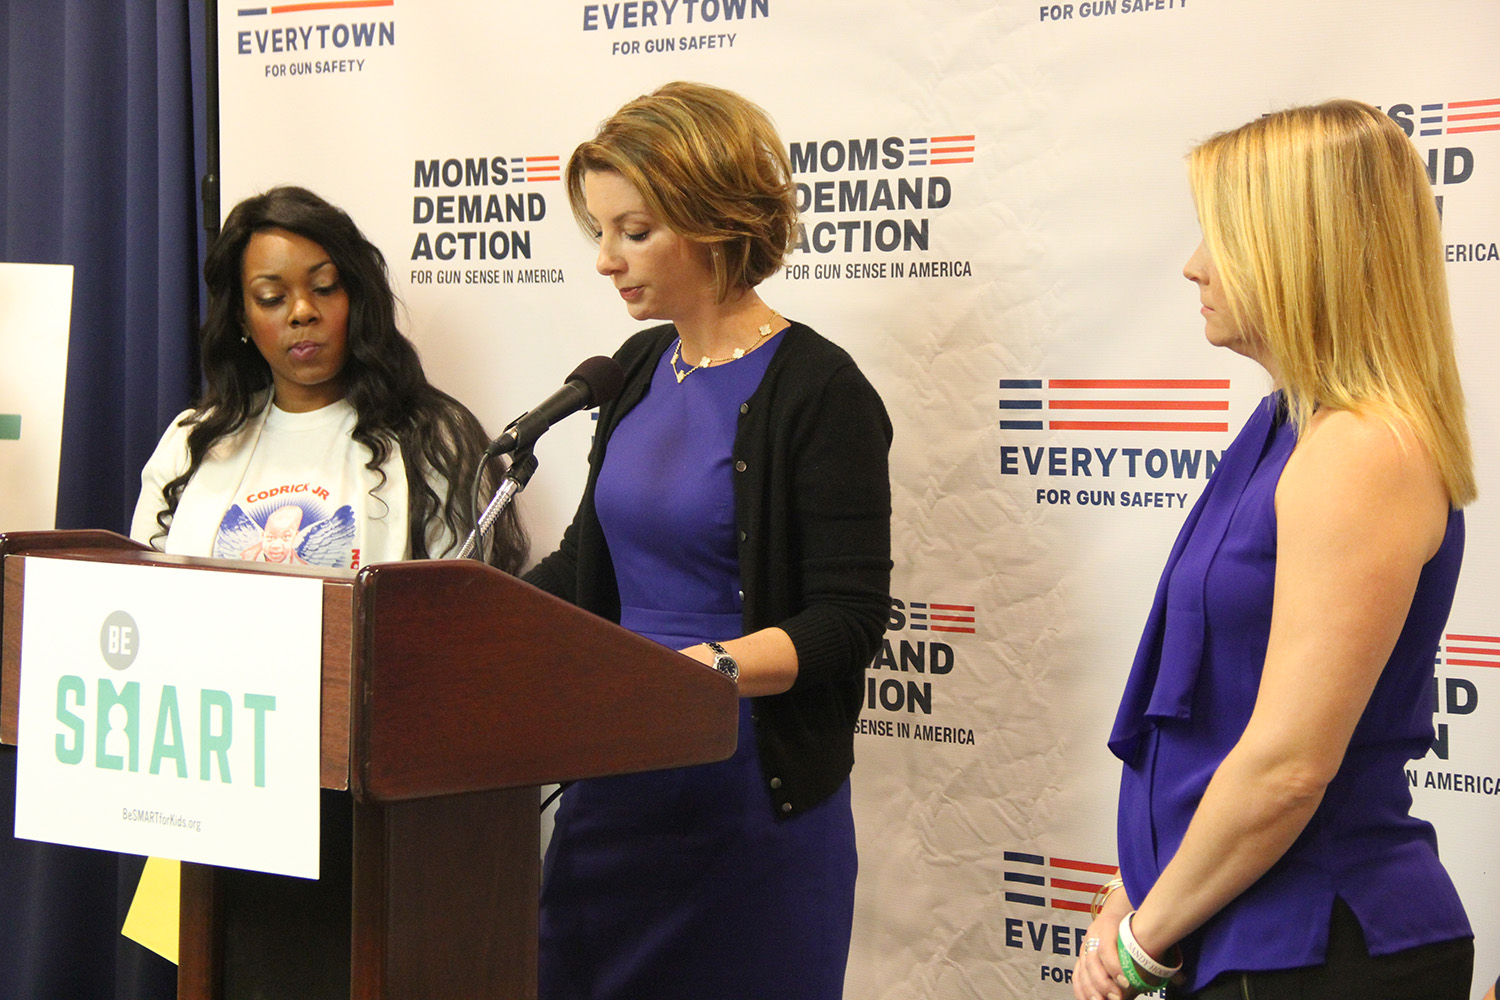 Shannon Watts, the founder of Moms Demand Action for Gun Sense in America, speaks at a conference in Washington D.C. on May 4, 2015, while actress Melissa Joan Hart and Ashley Beal look on. Hart and Beal were both speakers at the event. (Yinmeng Liu/MEDILL NSJI)